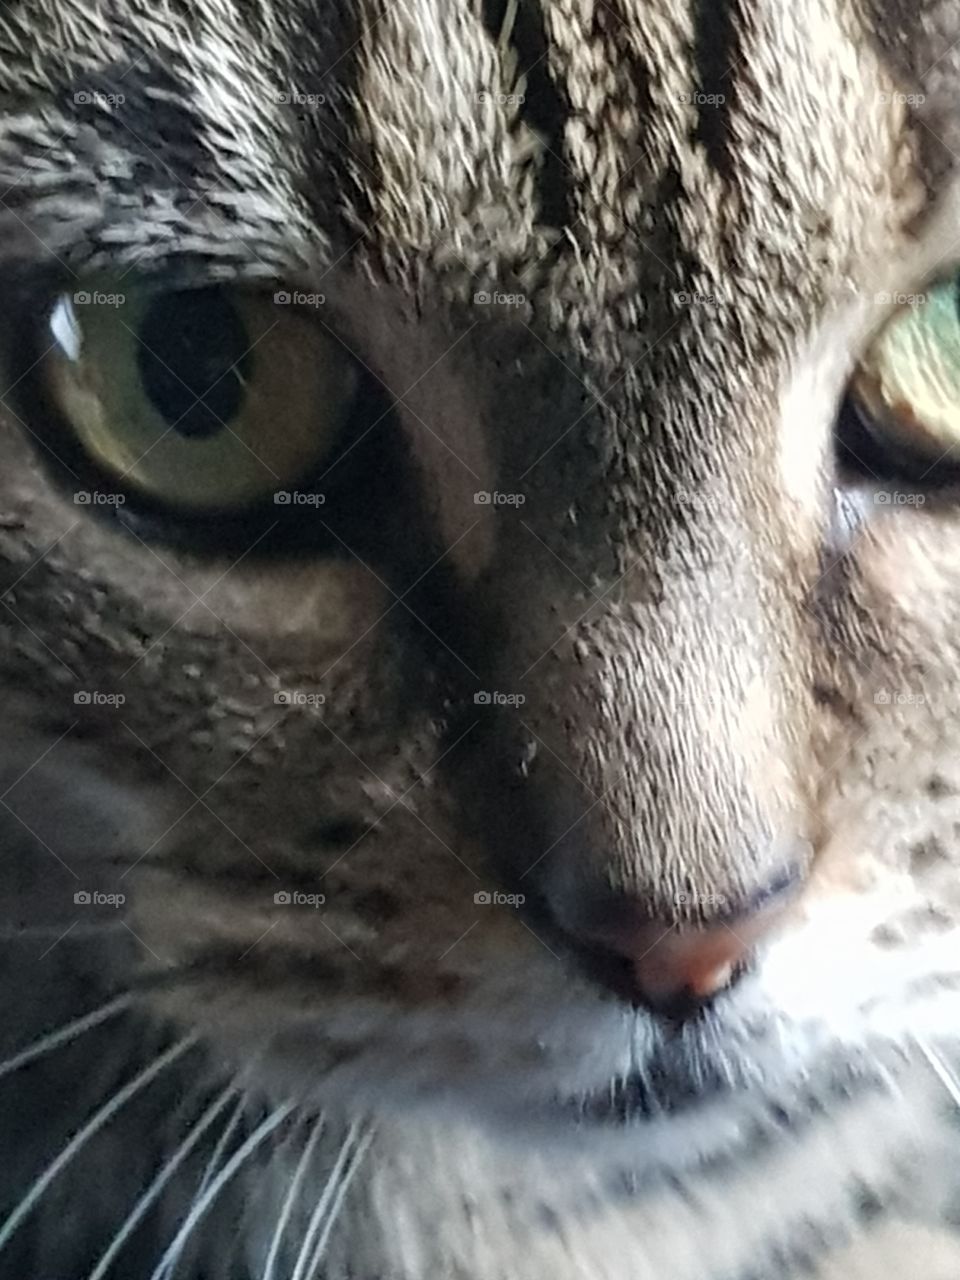 cats nose